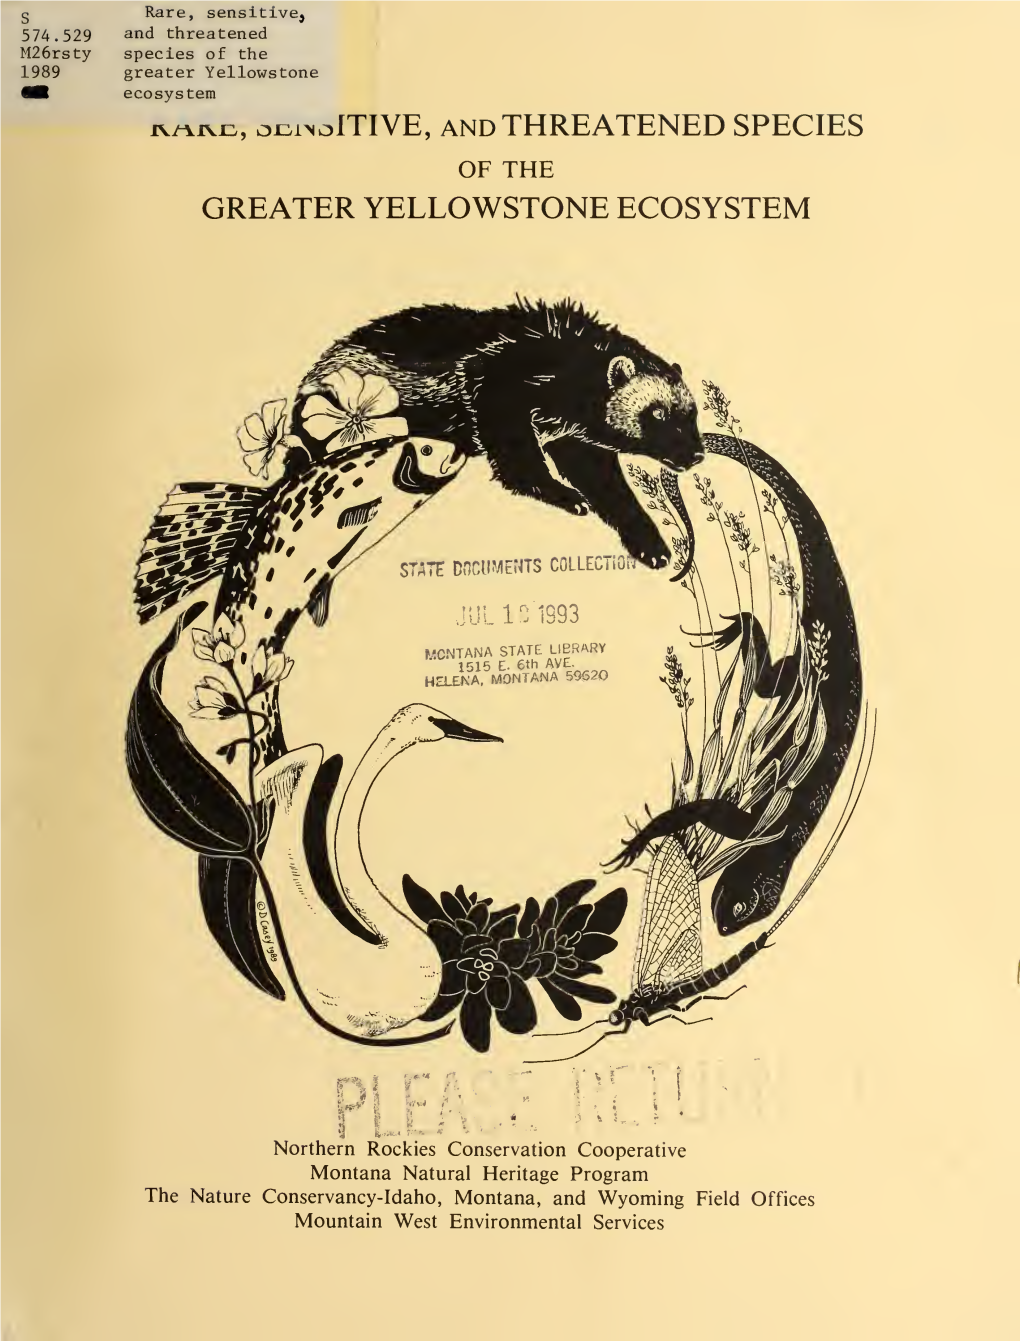 Rare, Sensitive, and Threatened Species of the Greater Yellowstone Ecosystem